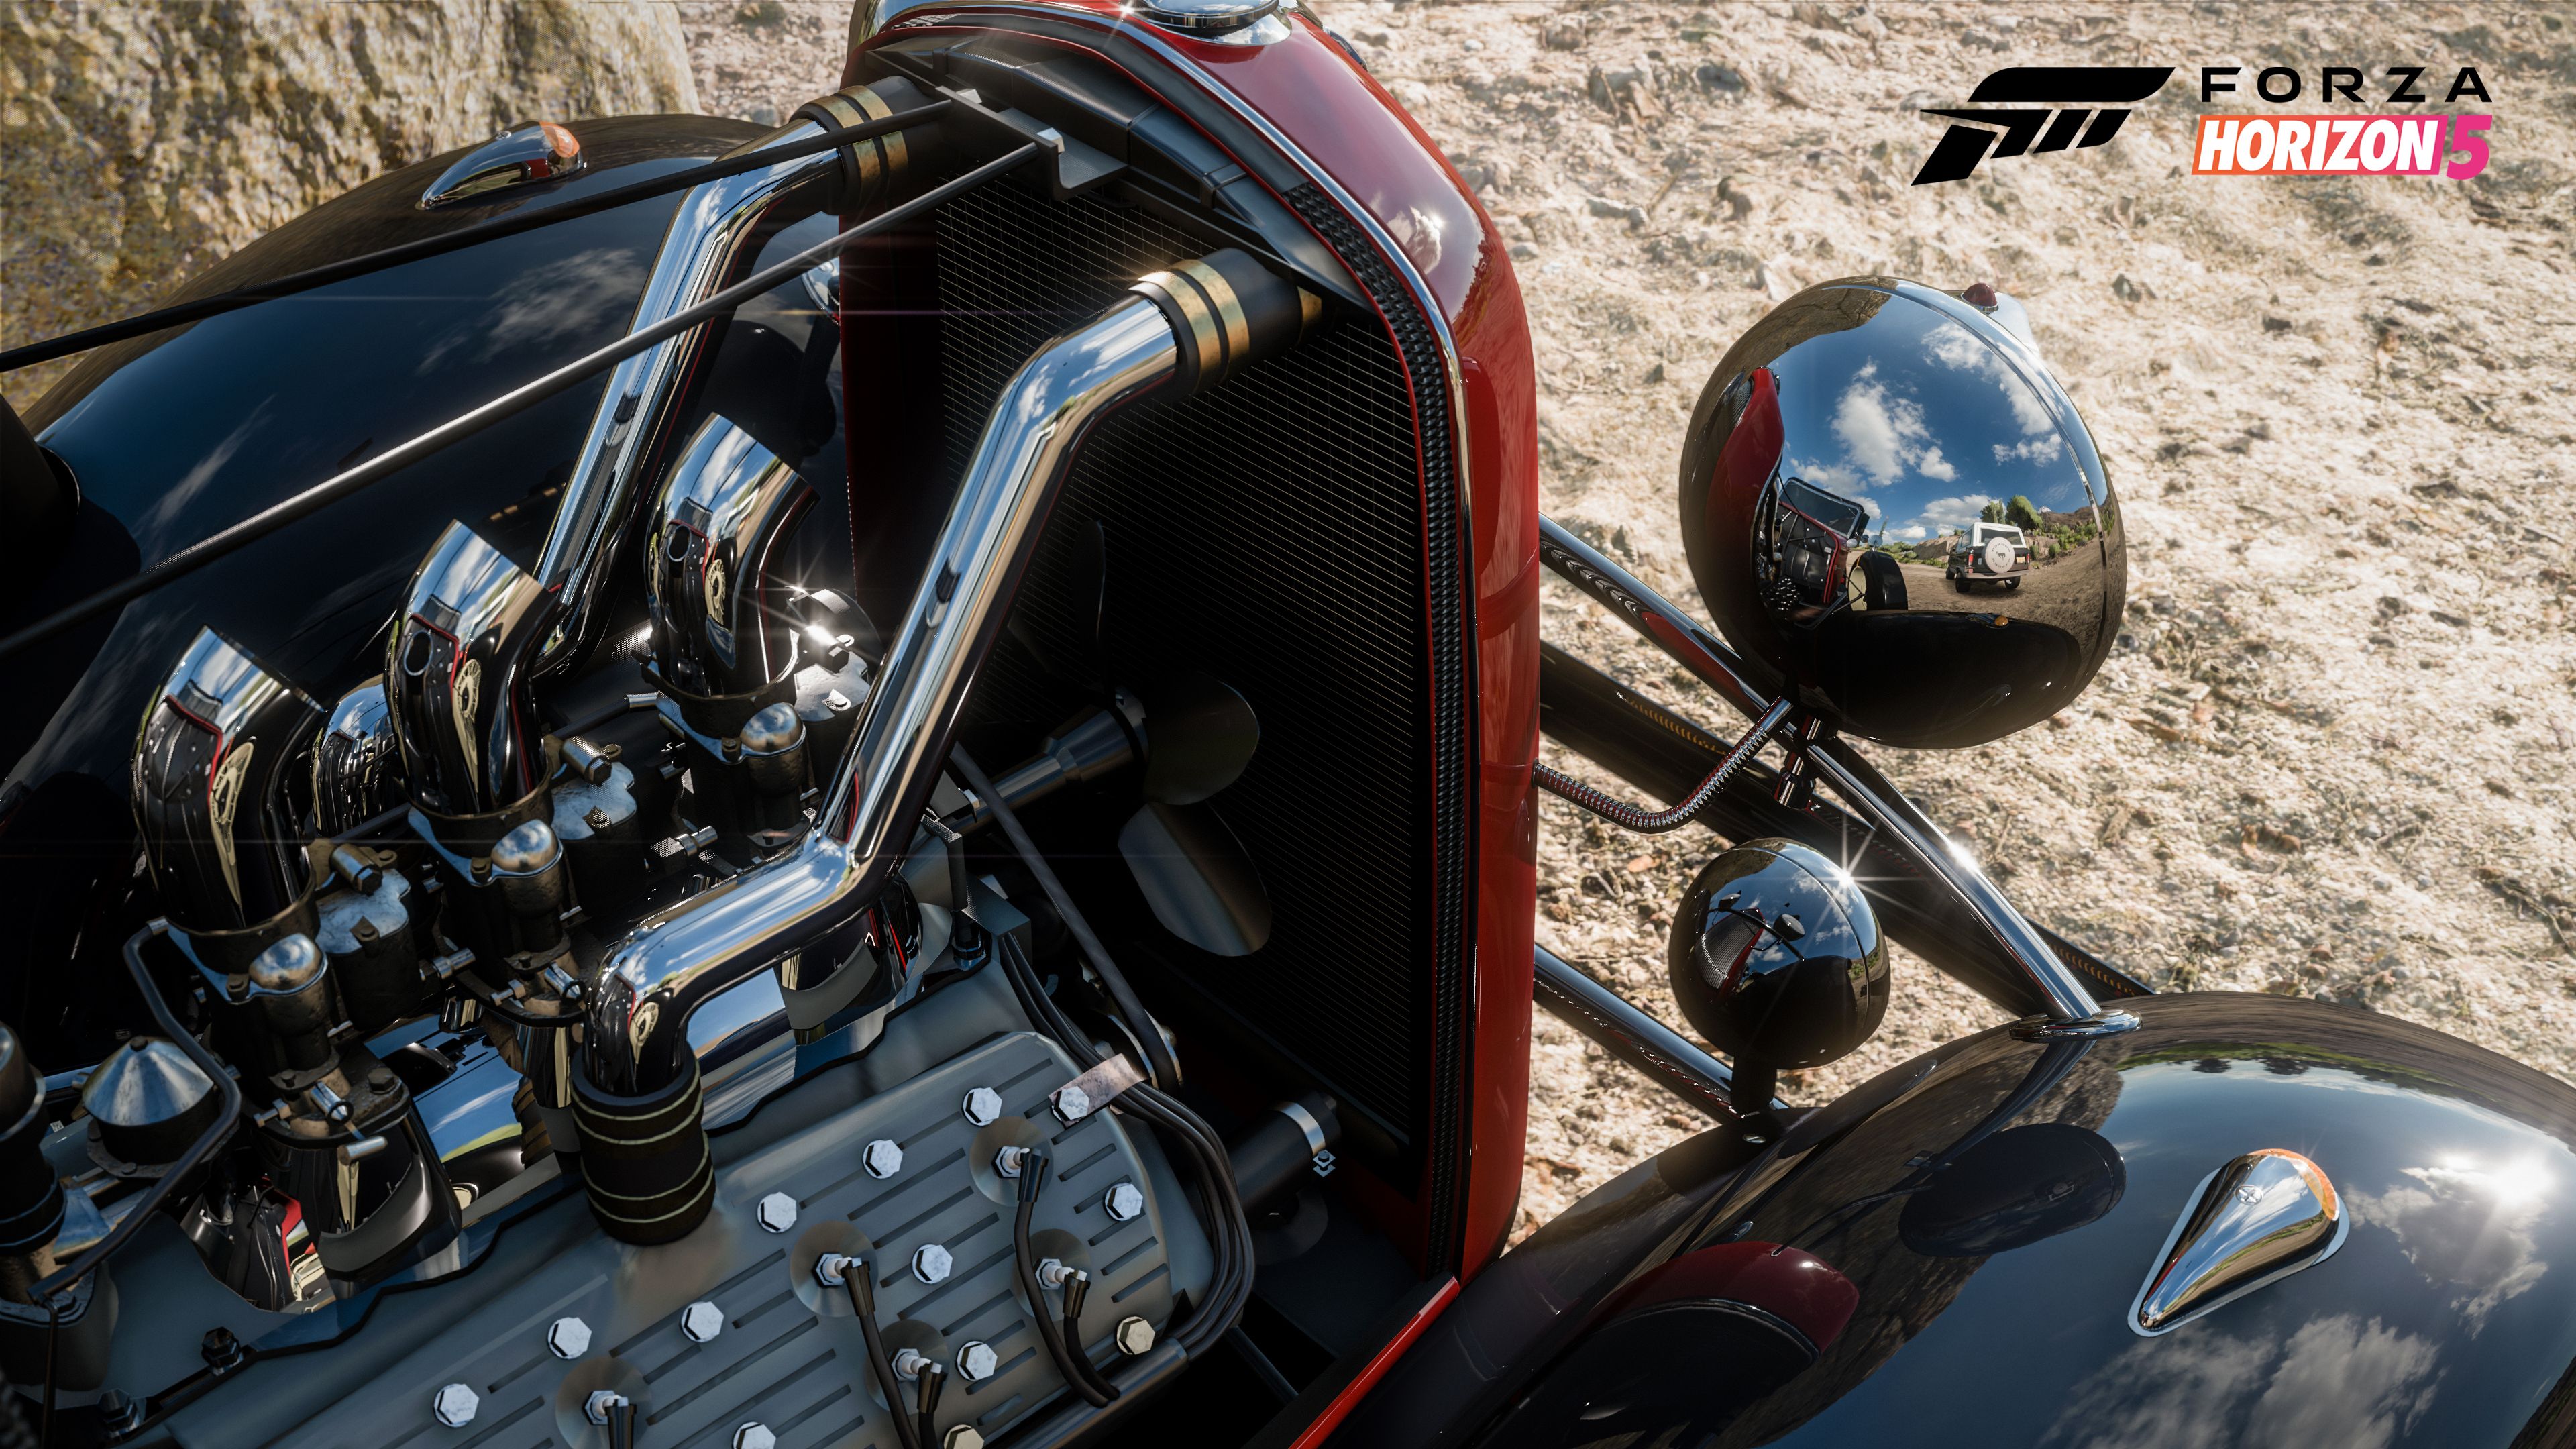 The engine bay details of a classic car in Forza Horizon 5